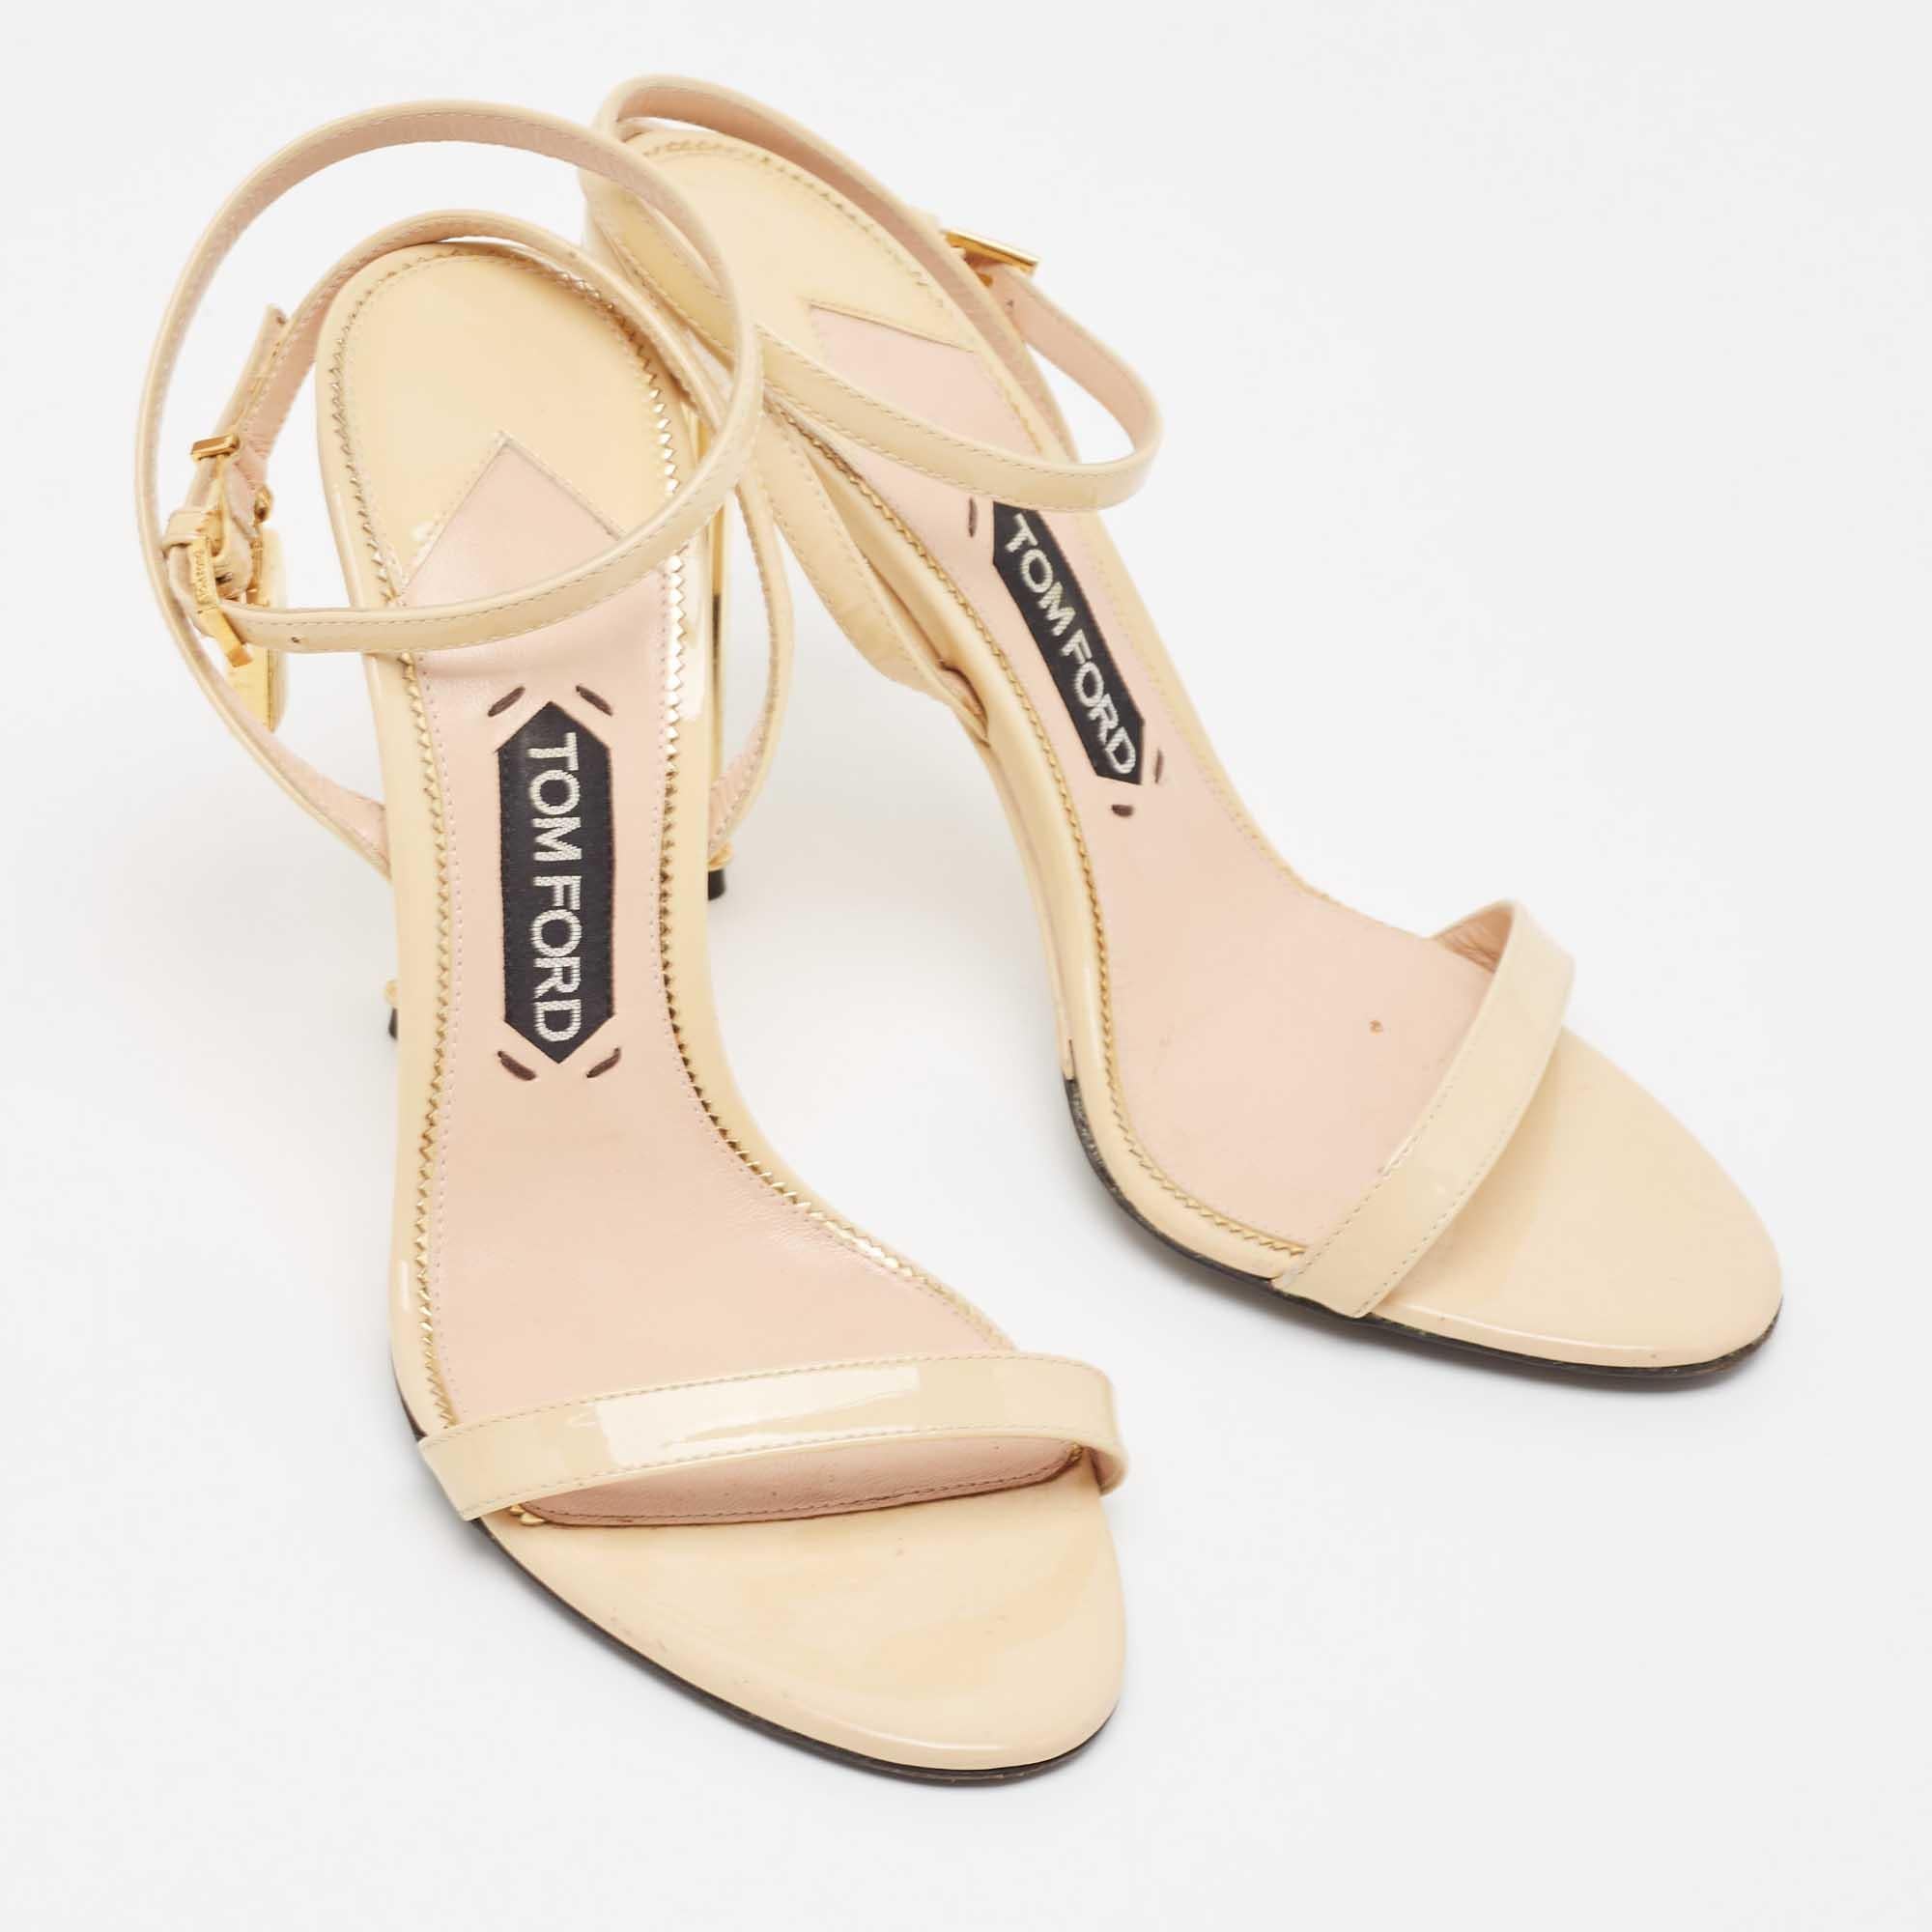 Beige Tom Ford Cream Patent Leather Padlock Ankle Strap Sandals Size 39